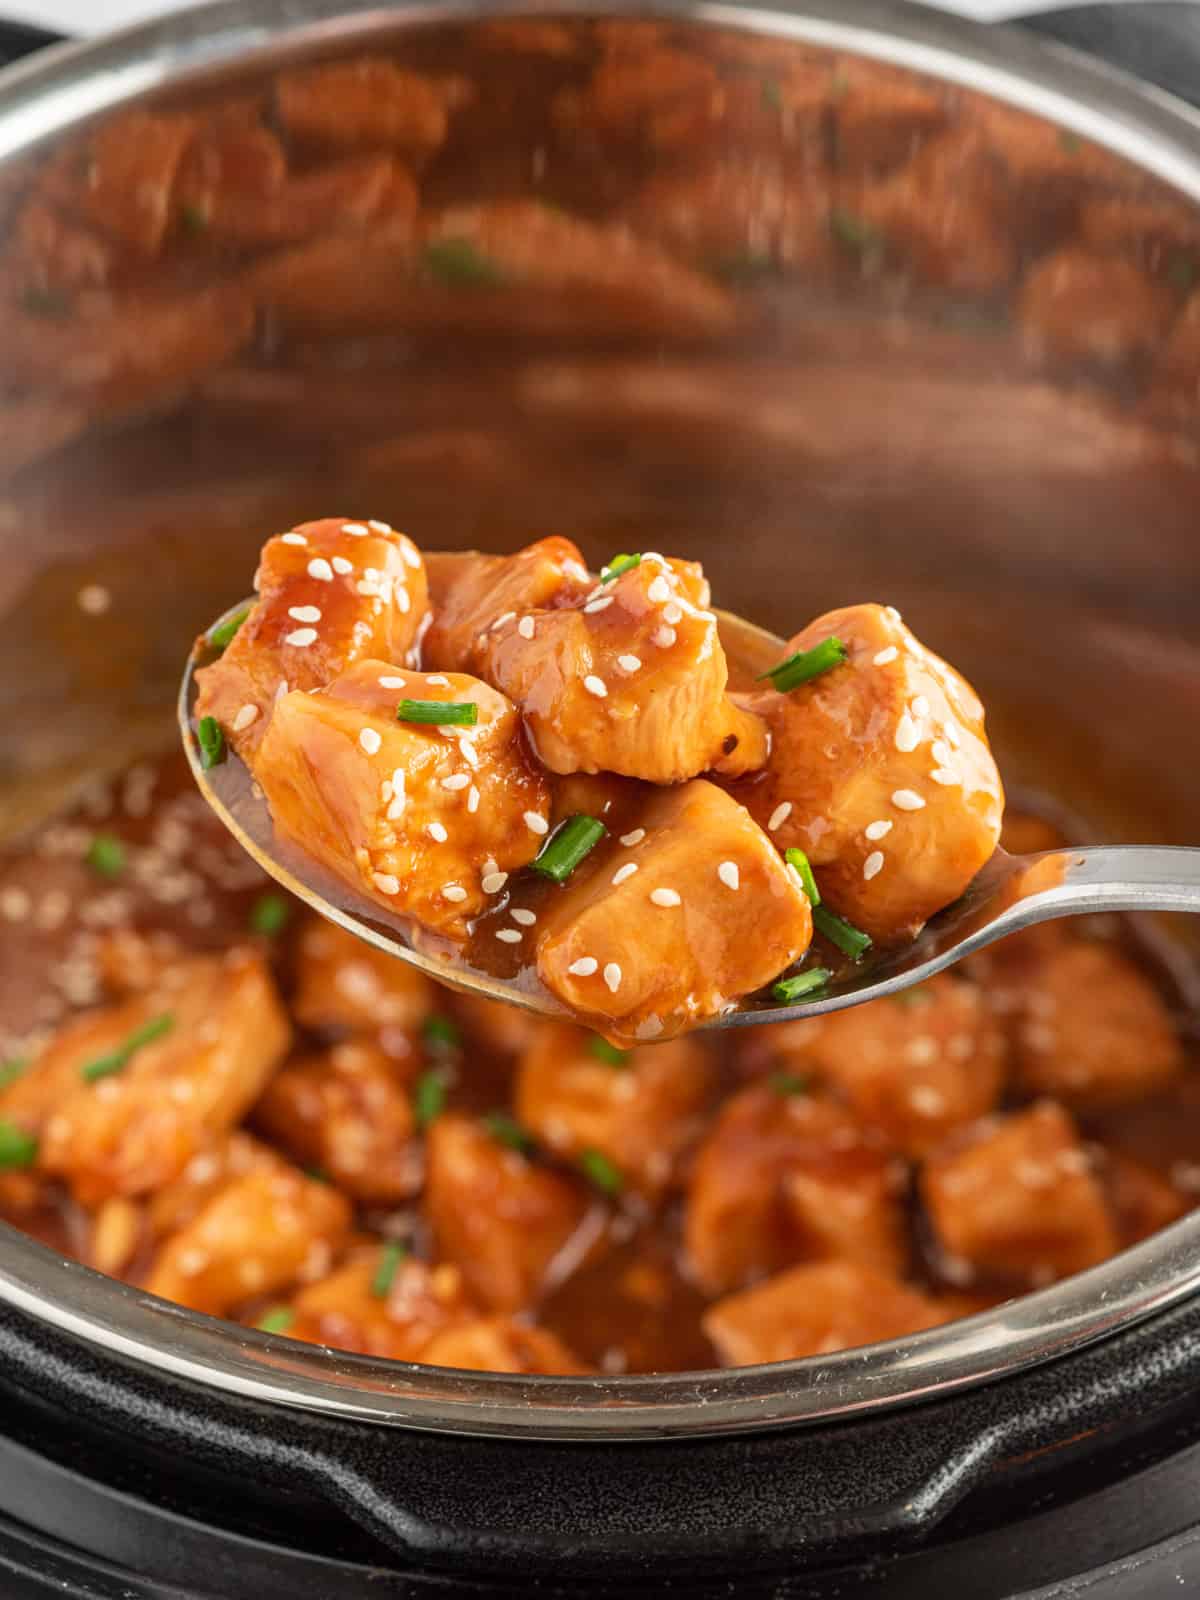 A spoon scoops chicken with sesame sauce out of pressure cooker.